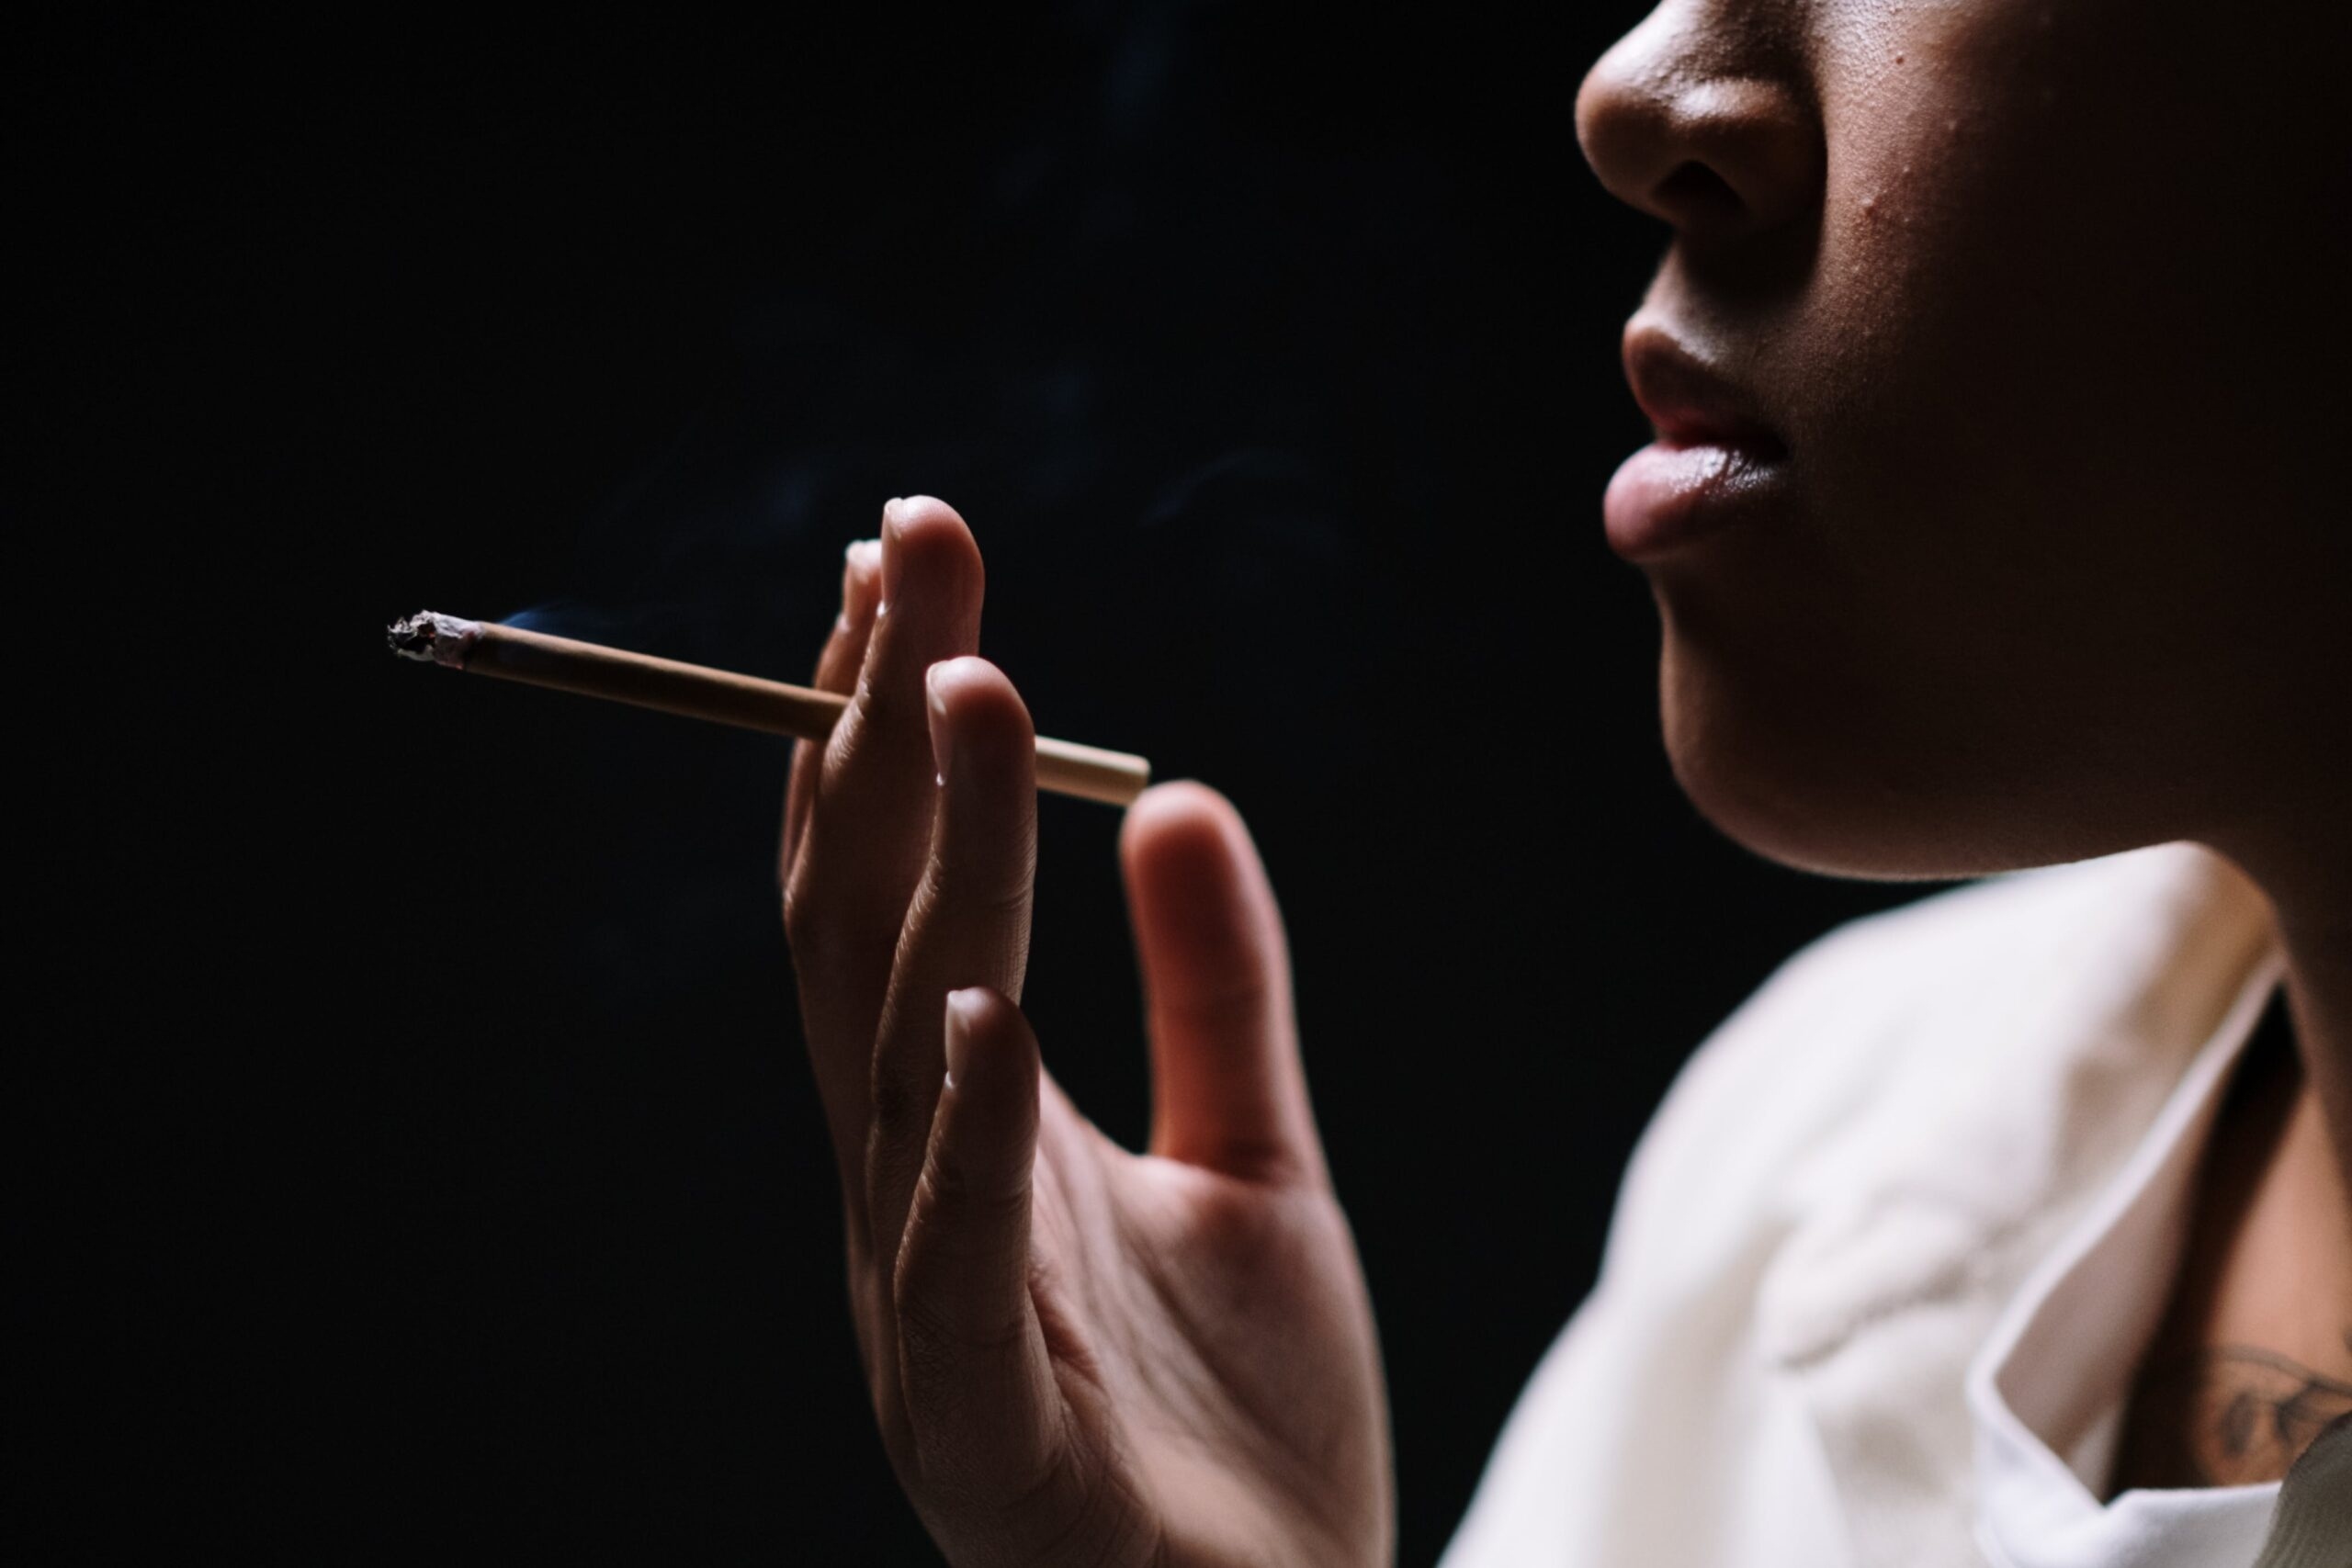 Can Smoking Affect Your Career Prospects?